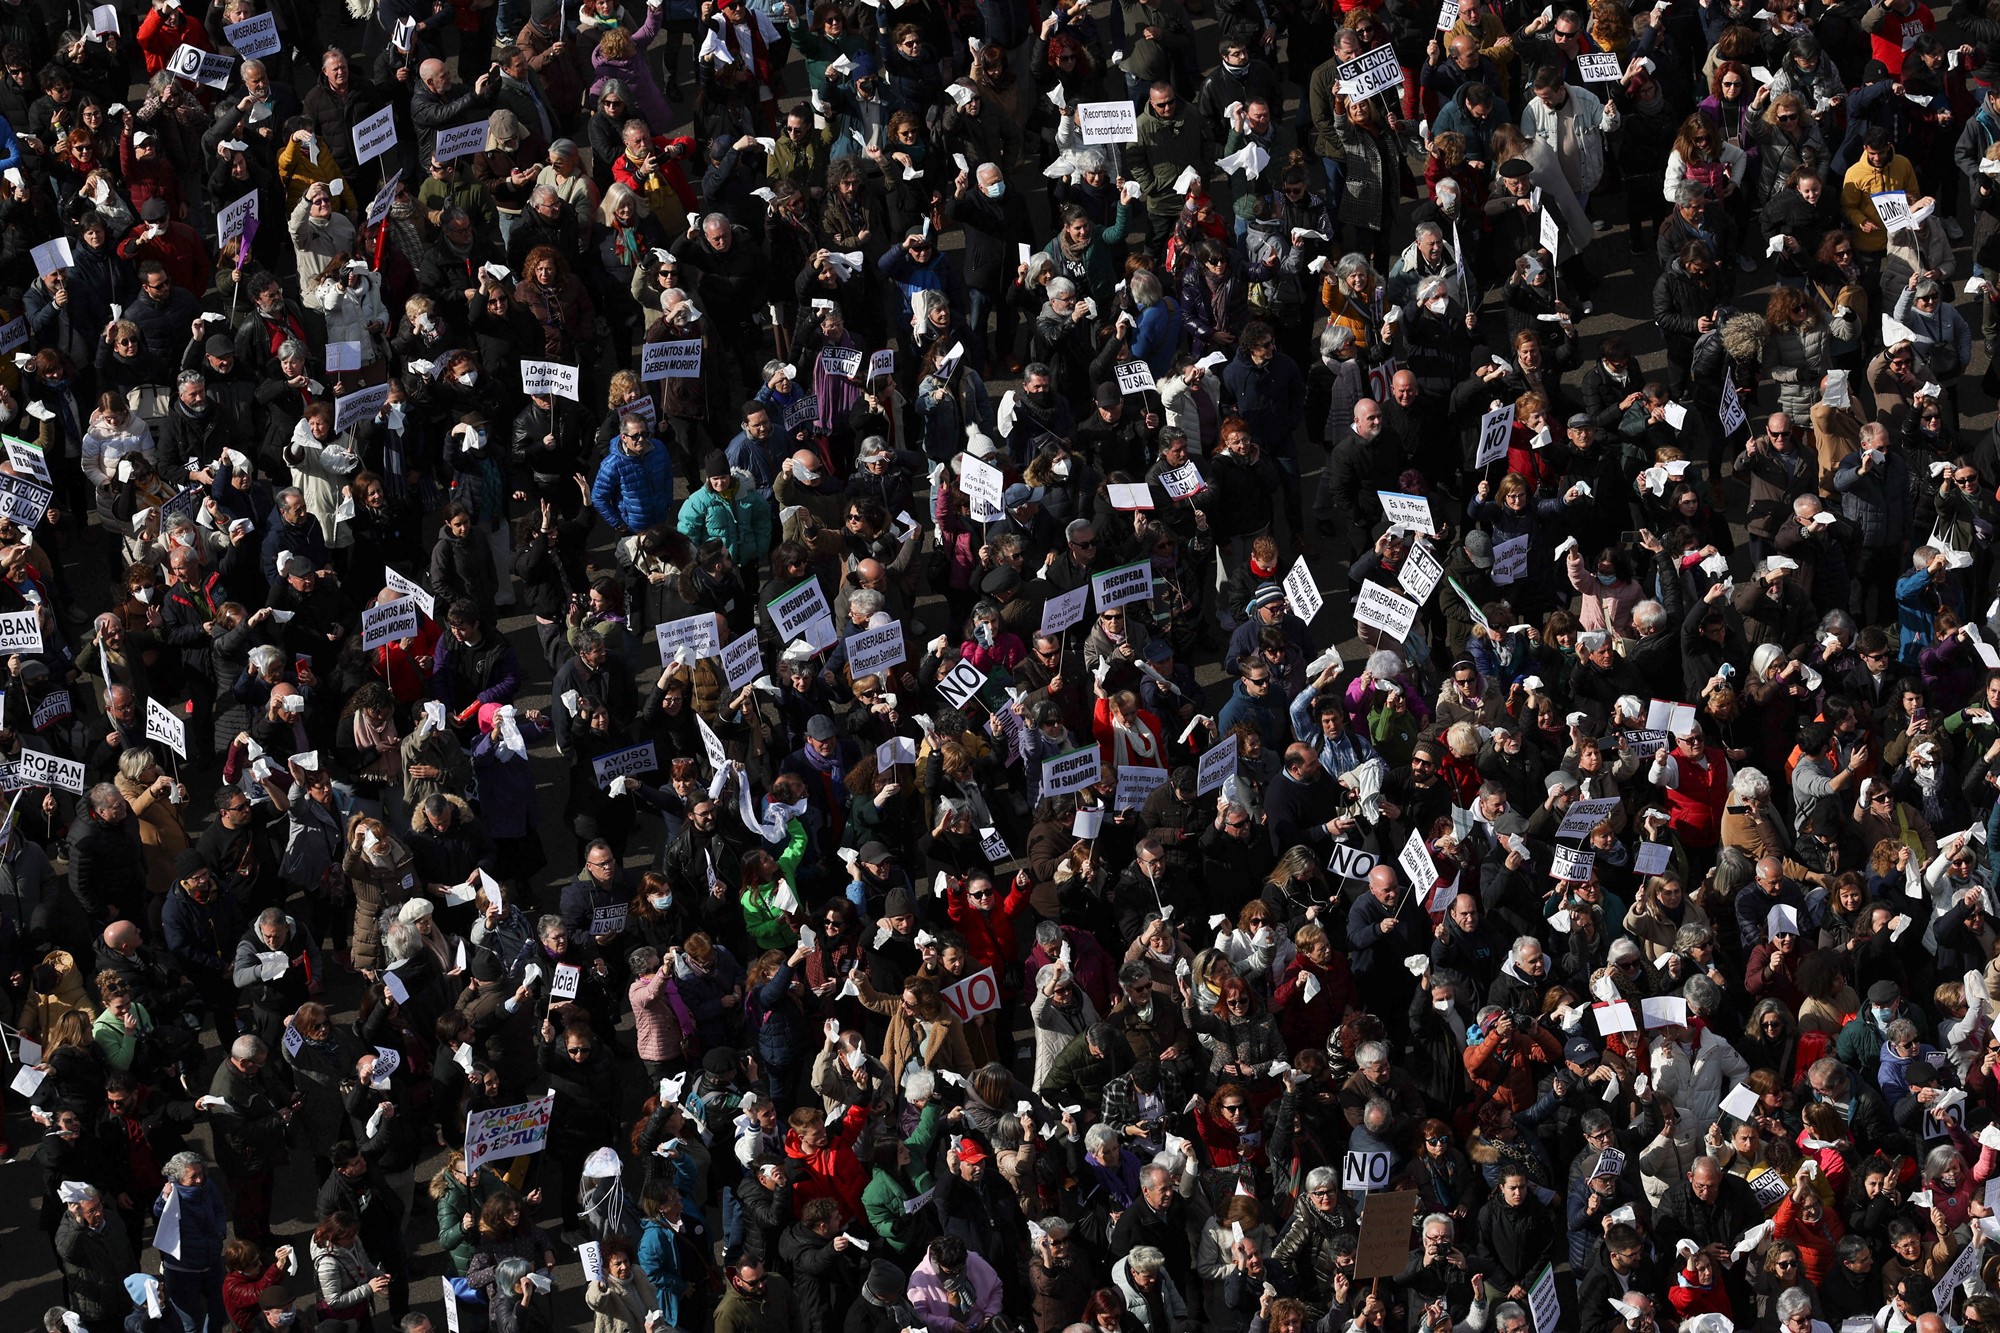 An aerial shot of a protesting crowd holding signs - people fill the entire photo.